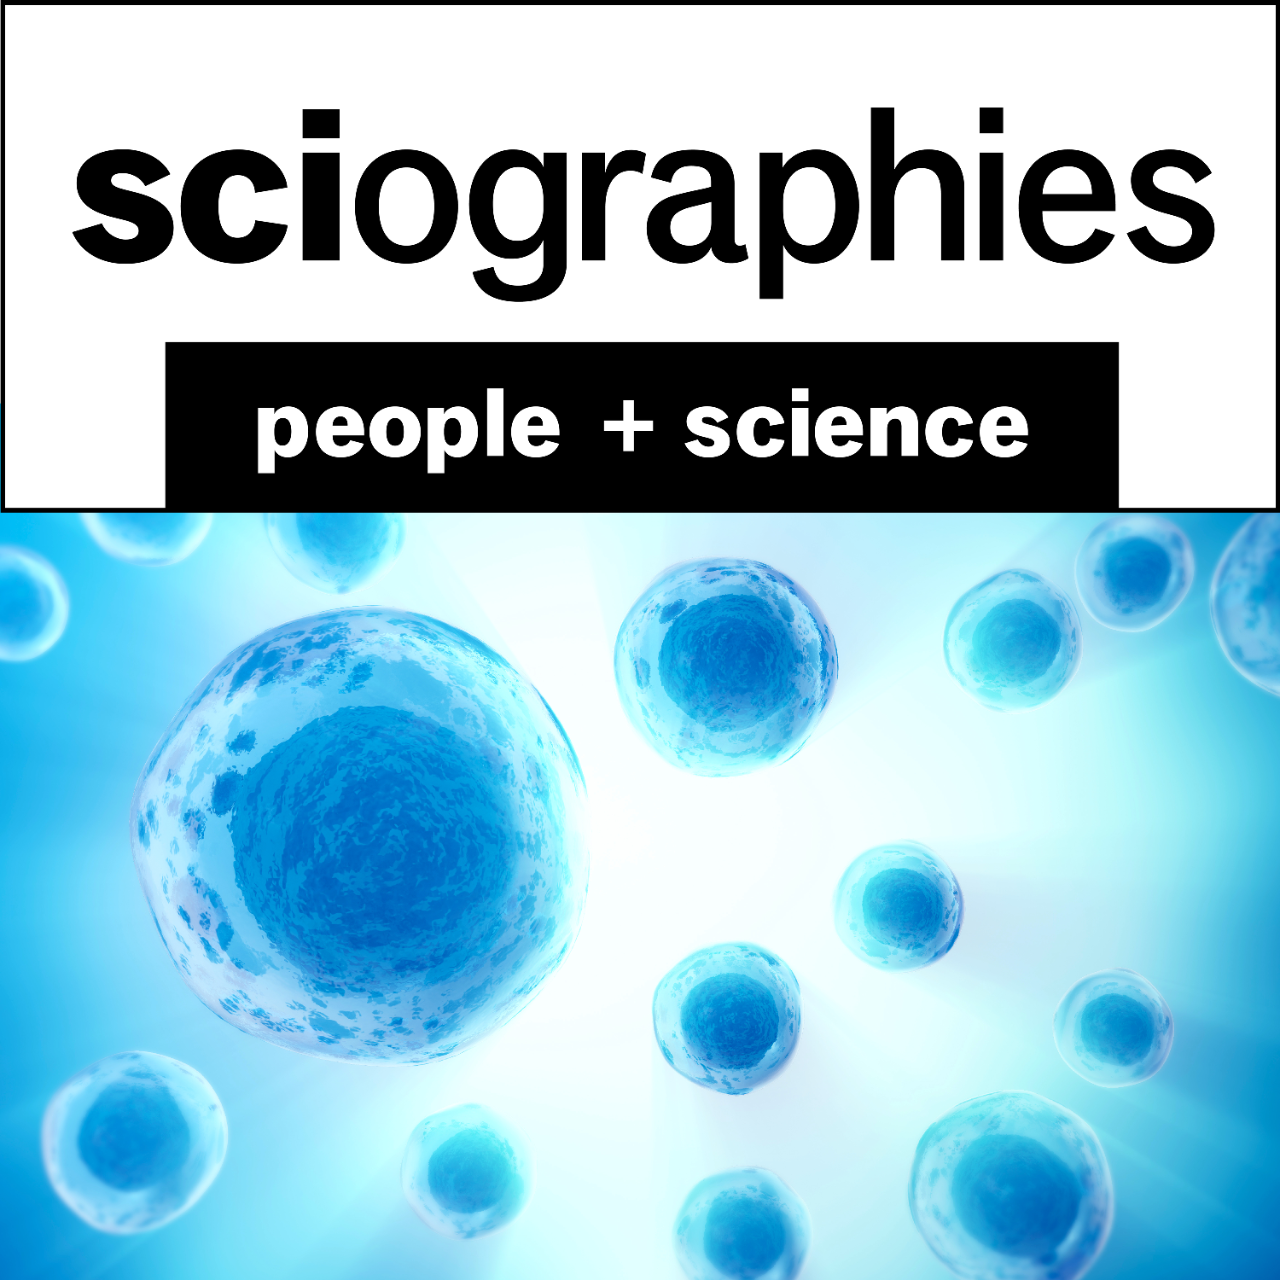 Blue and white promotional image for the Sciographies podcast and radio show